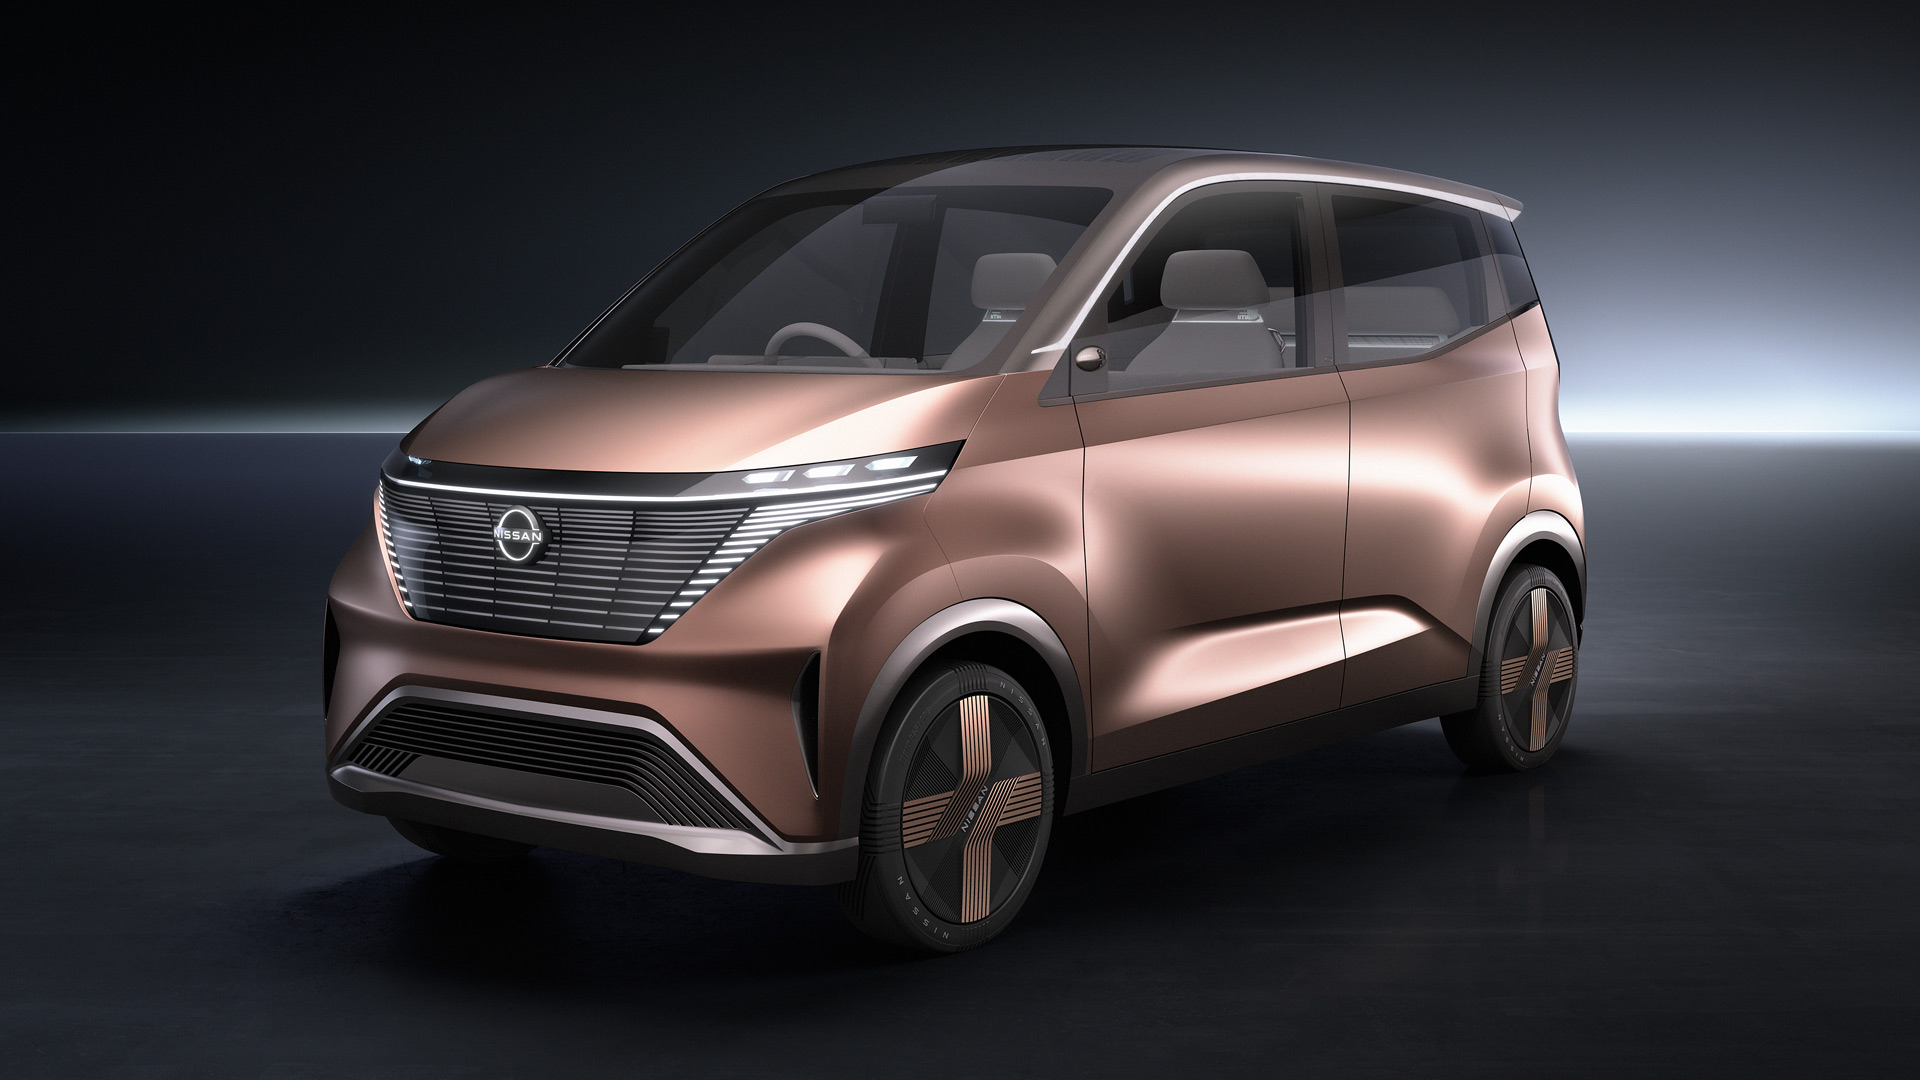 nissan imk electric minicar concept is so very japanese suggests new small ev platform